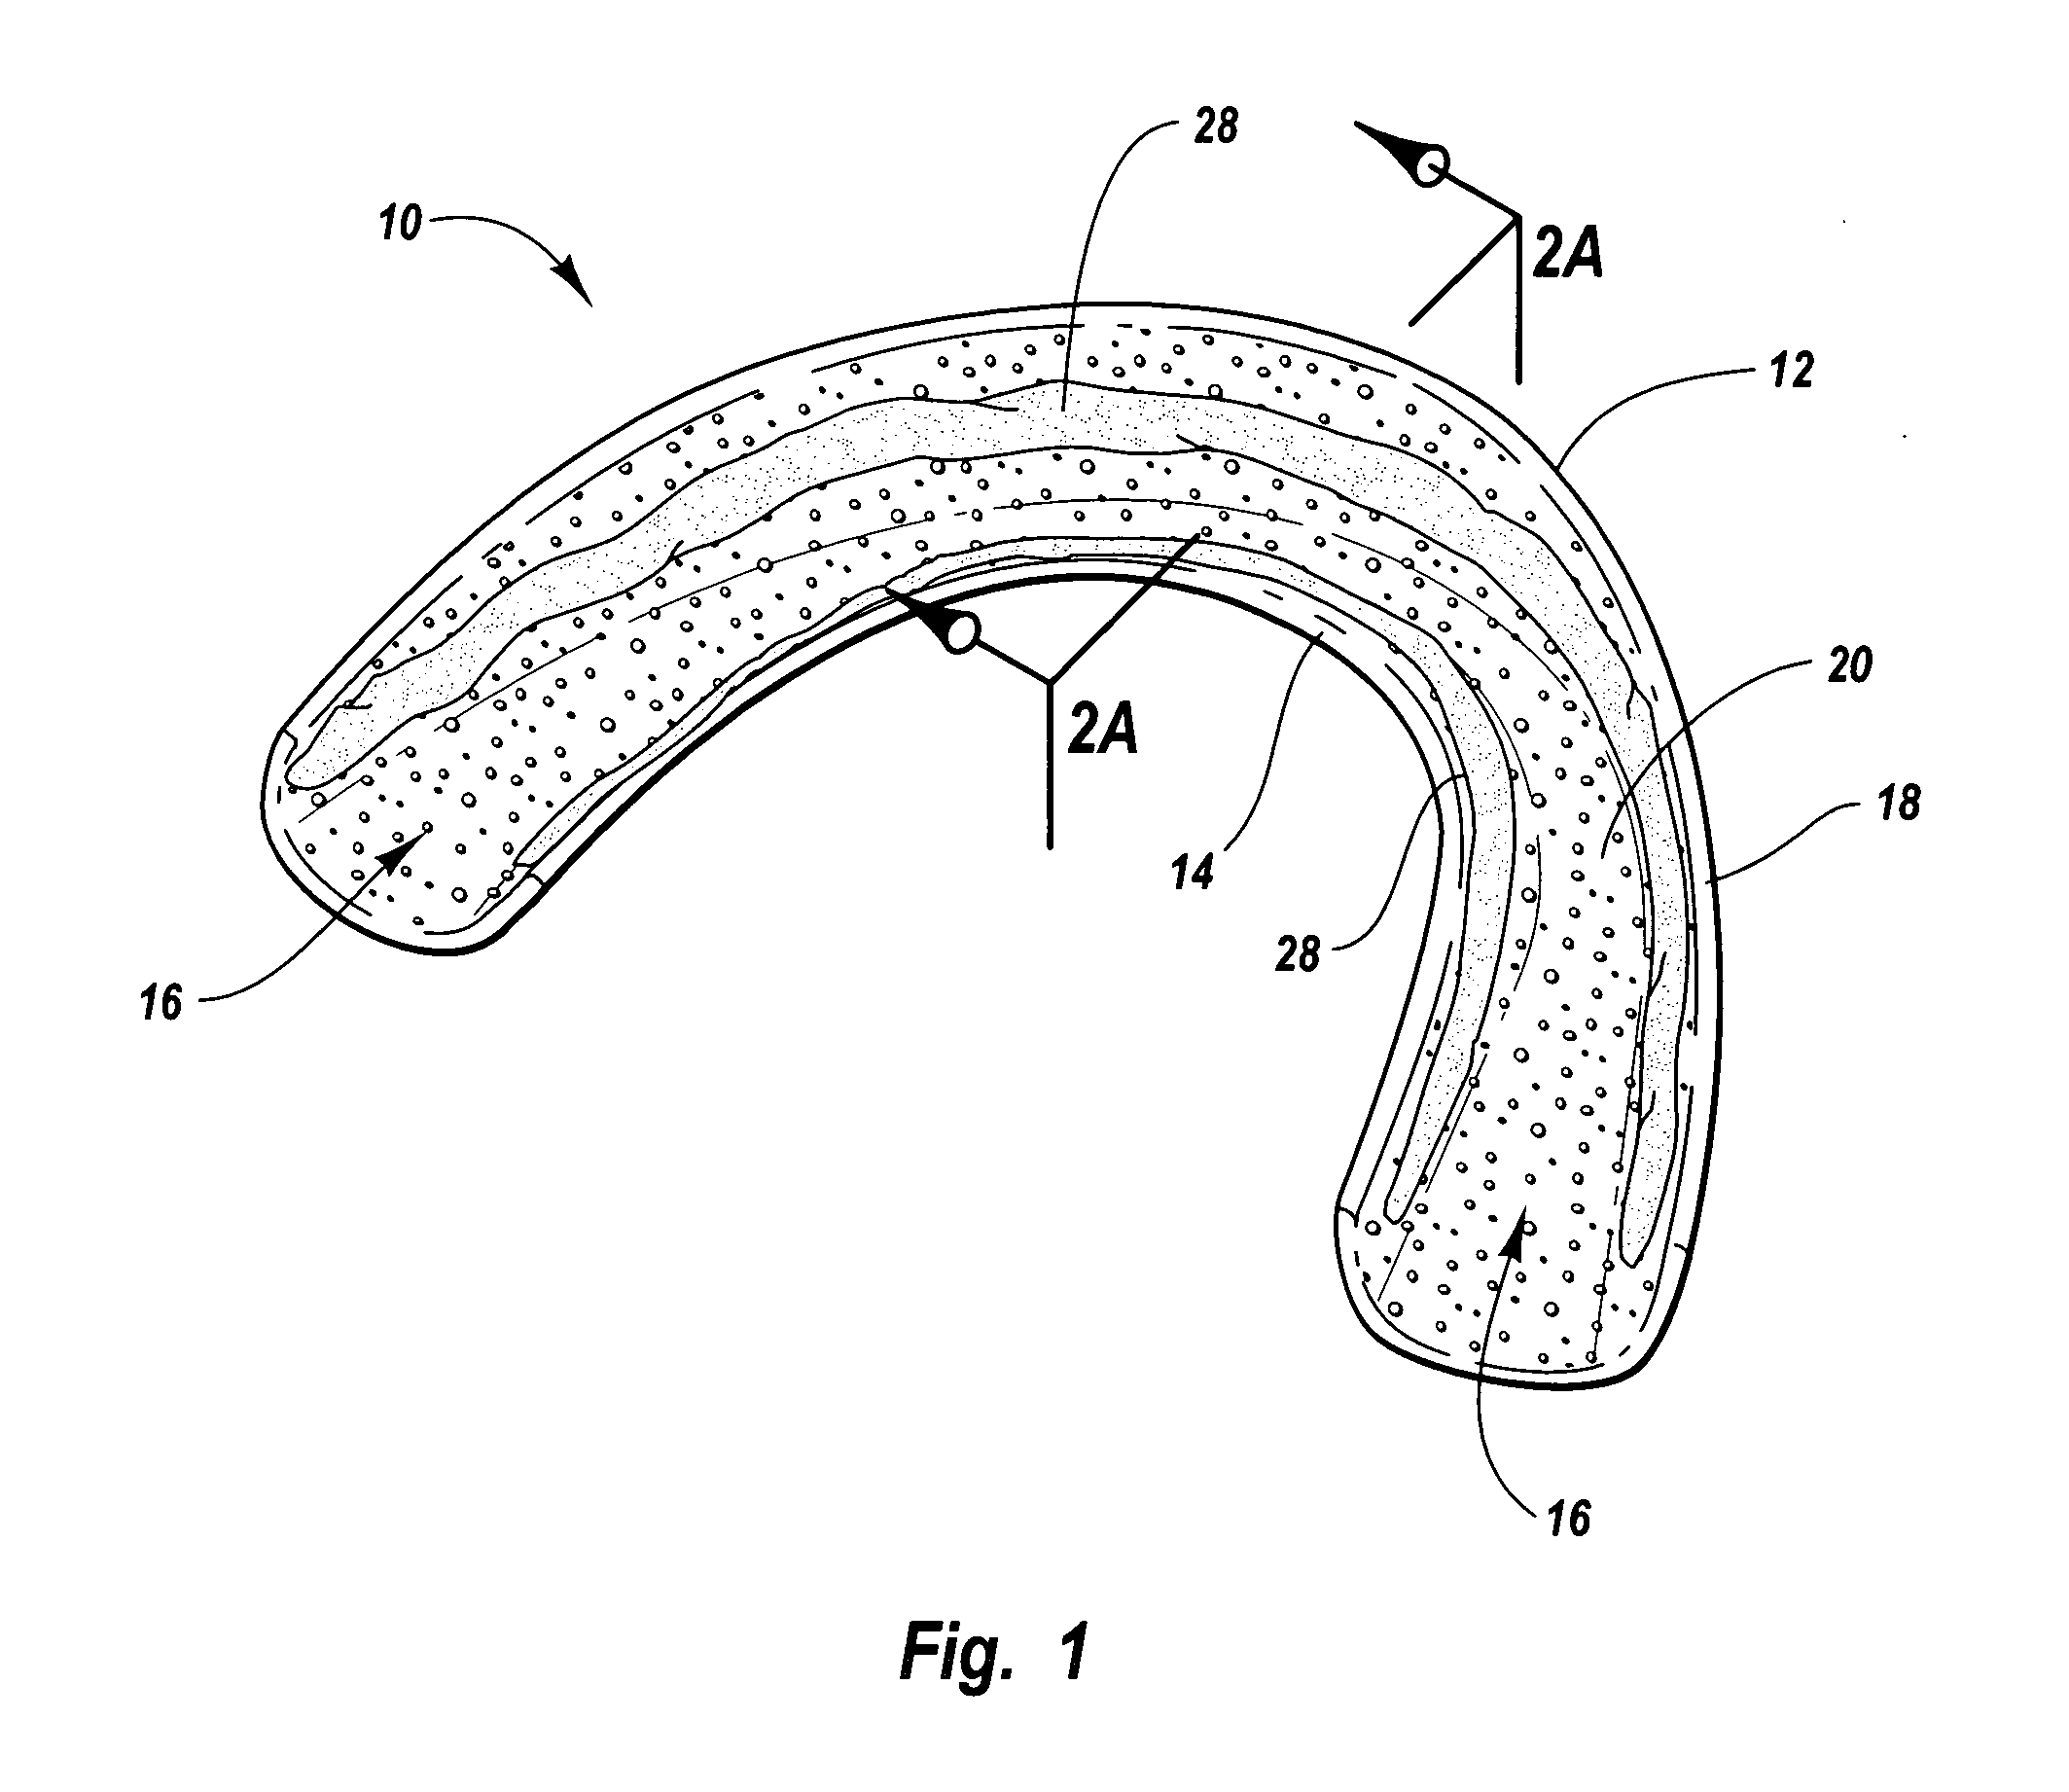 Dental bleaching compositions and devices having a solid activation adhesive layer or region and bleaching gel layer or region